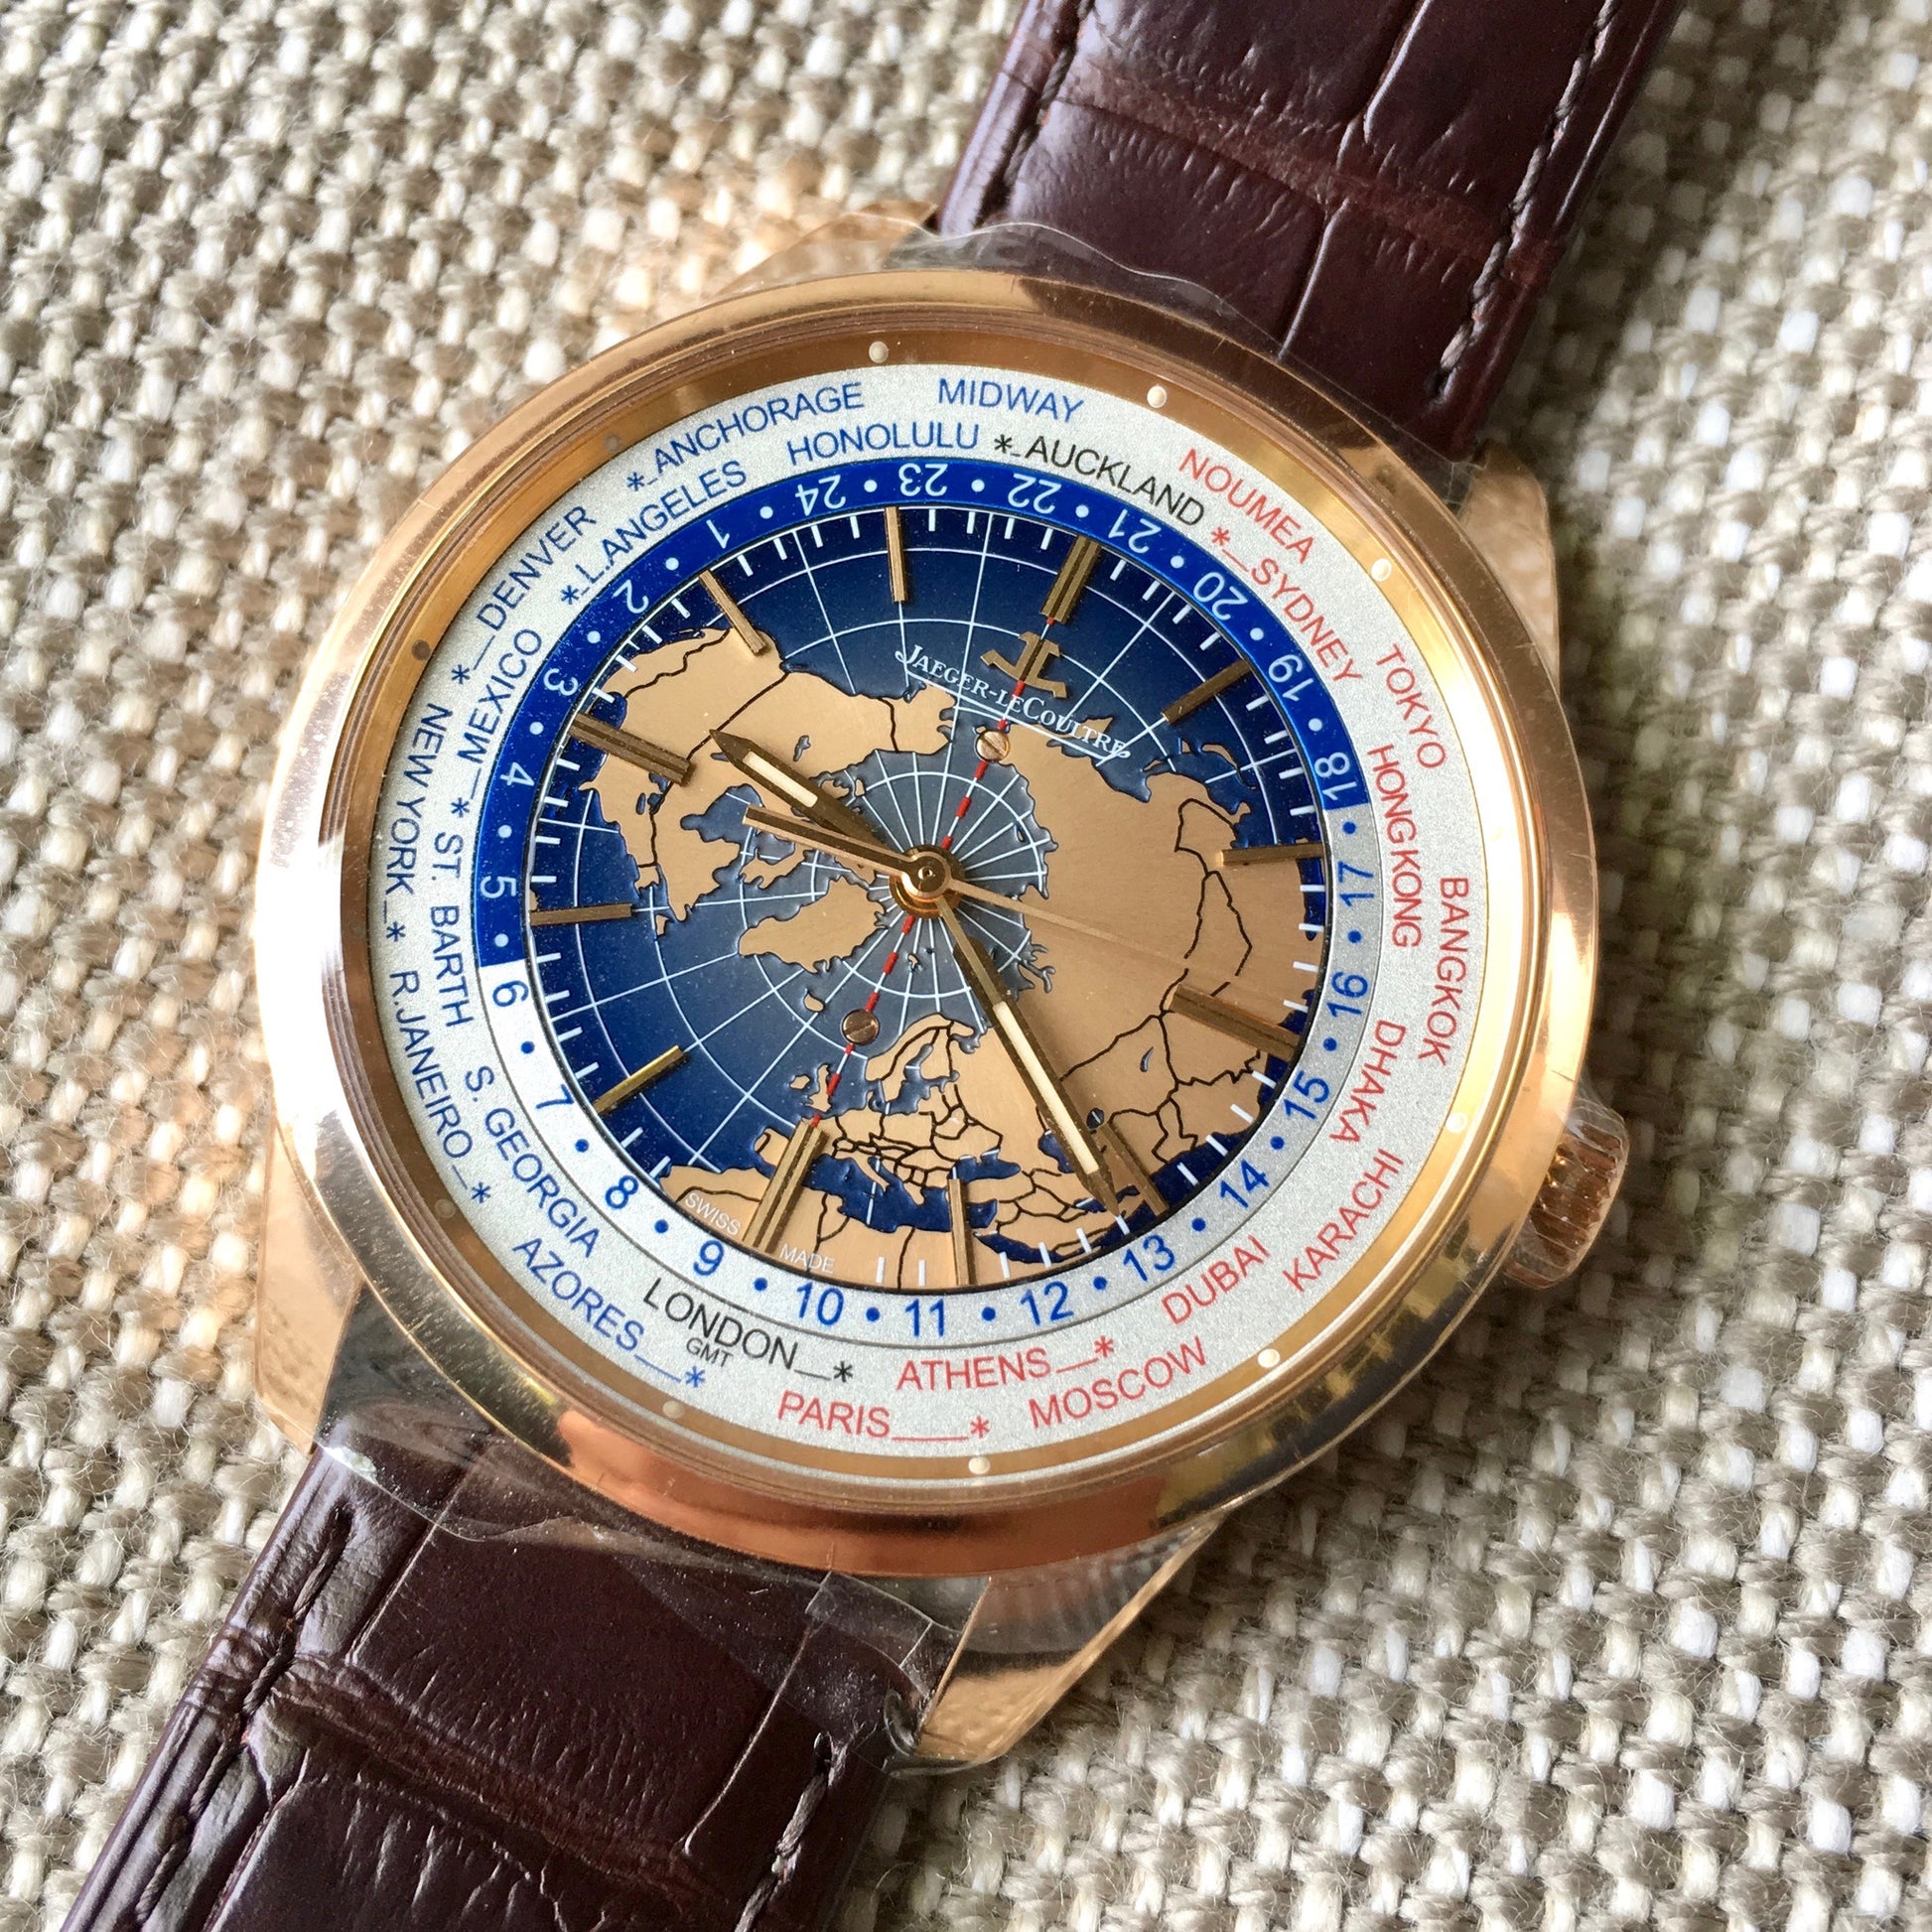 Jaeger LeCoultre Geophysic Universal Time Q8102520 Automatic Blue Lacquer Dial 18K Pink Gold Wristwatch - Hashtag Watch Company